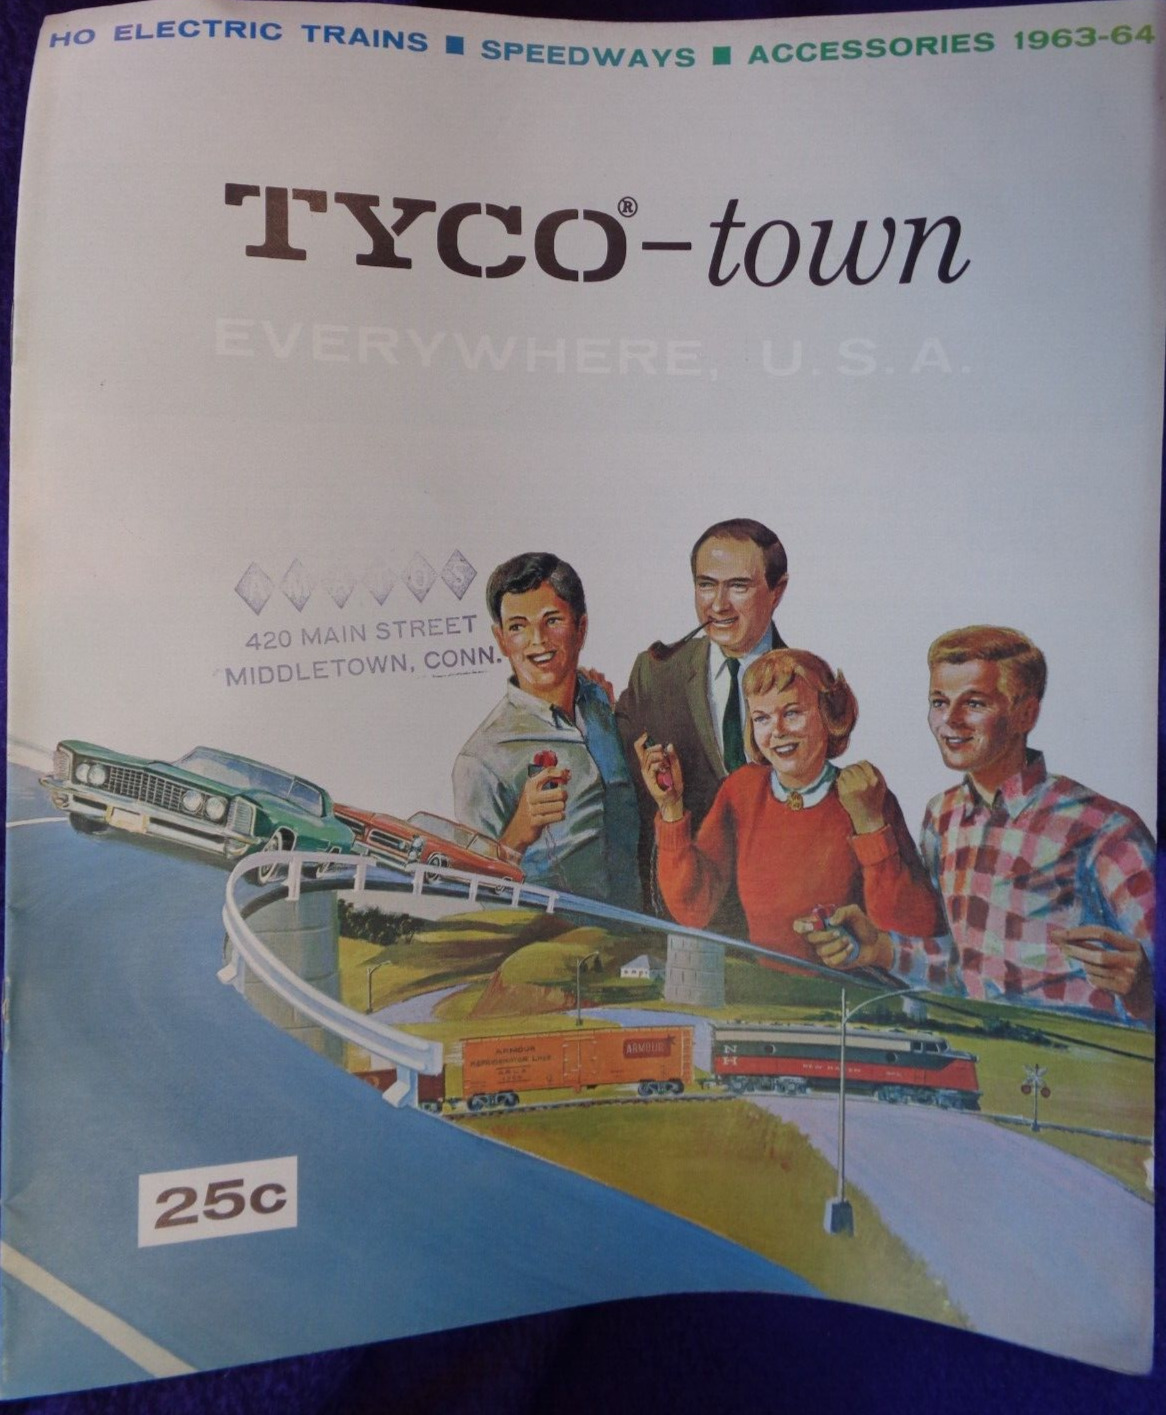 1963-64 TYCO-TOWN HO ELECTRIC TRAINS + SPEEDWAYS CATALOG + DEALER PRICE LIST